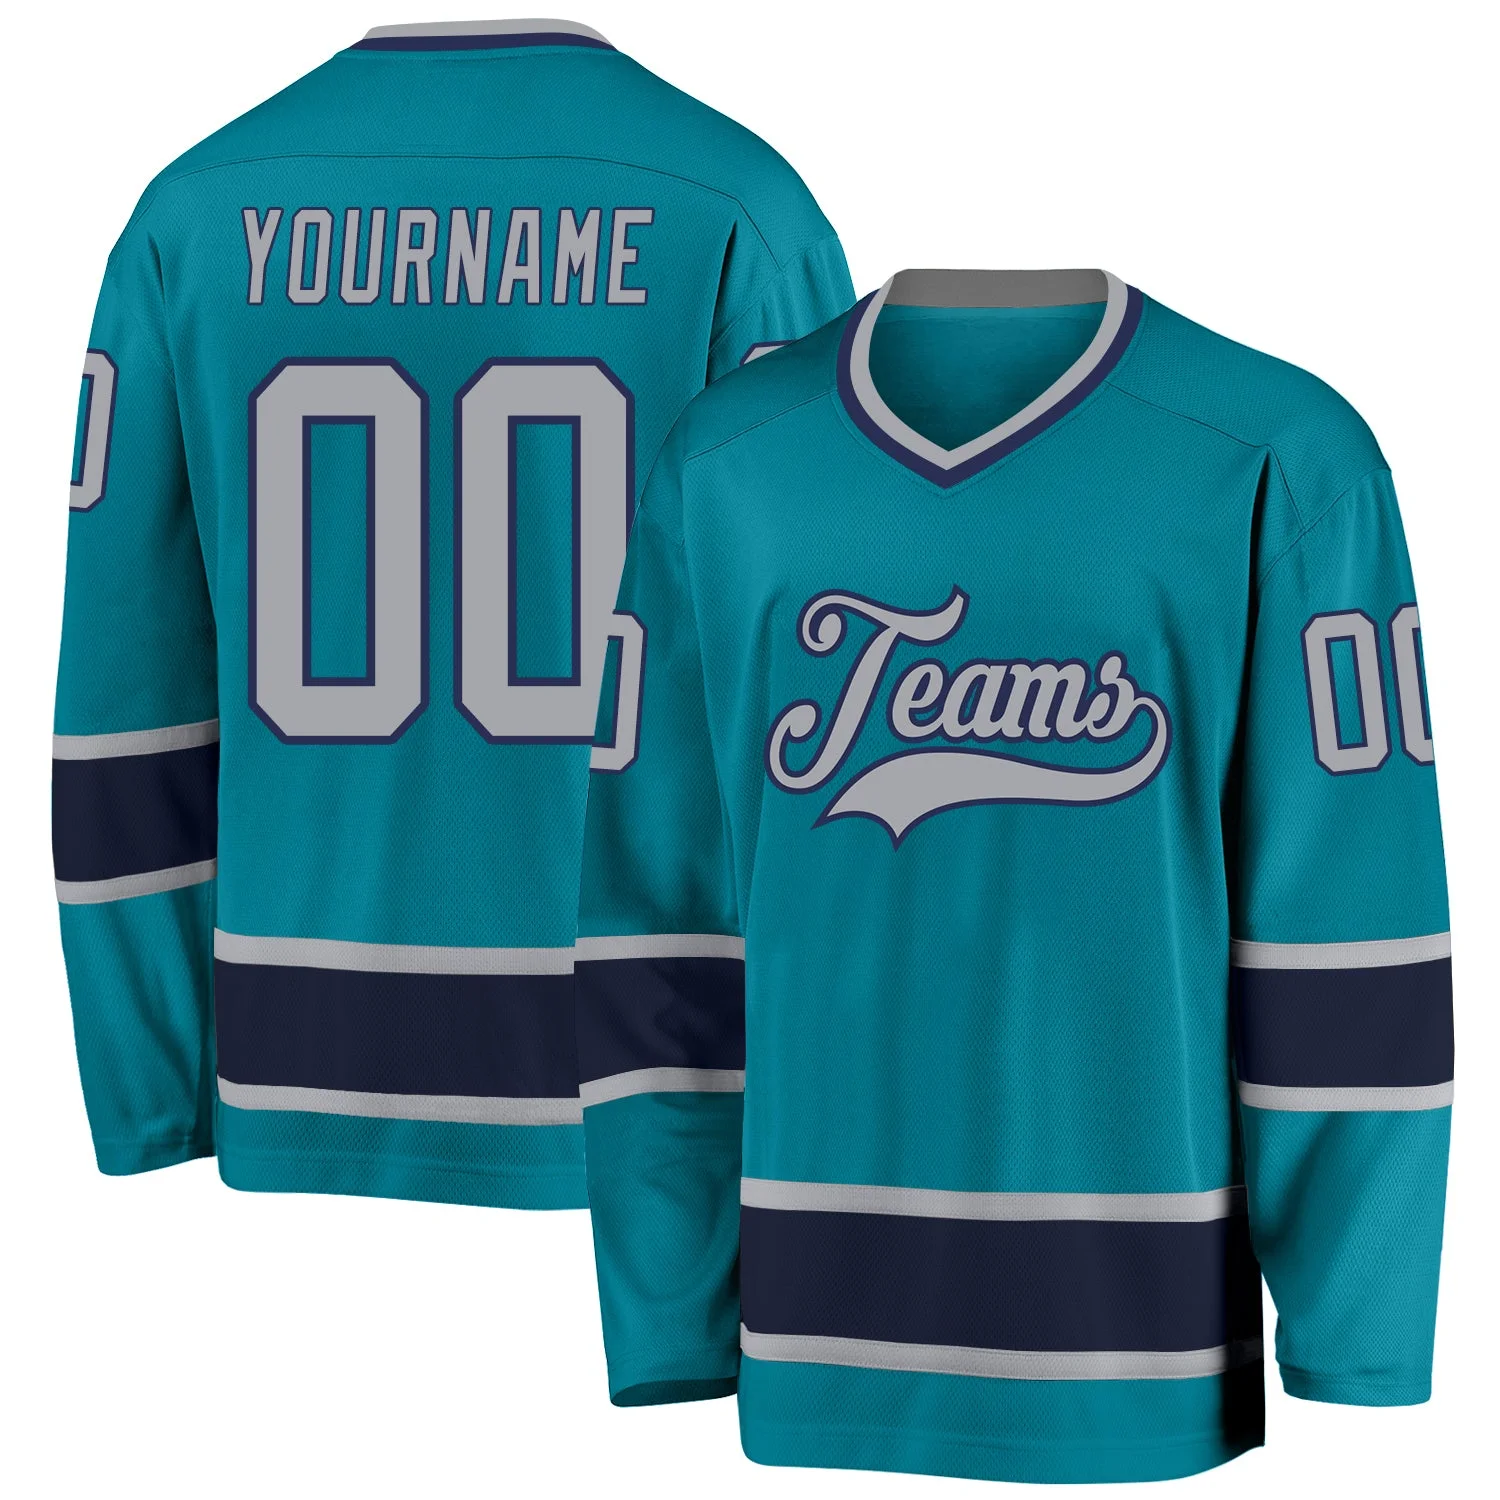 Stitched And Print Teal Gray-navy Hockey Jersey Custom